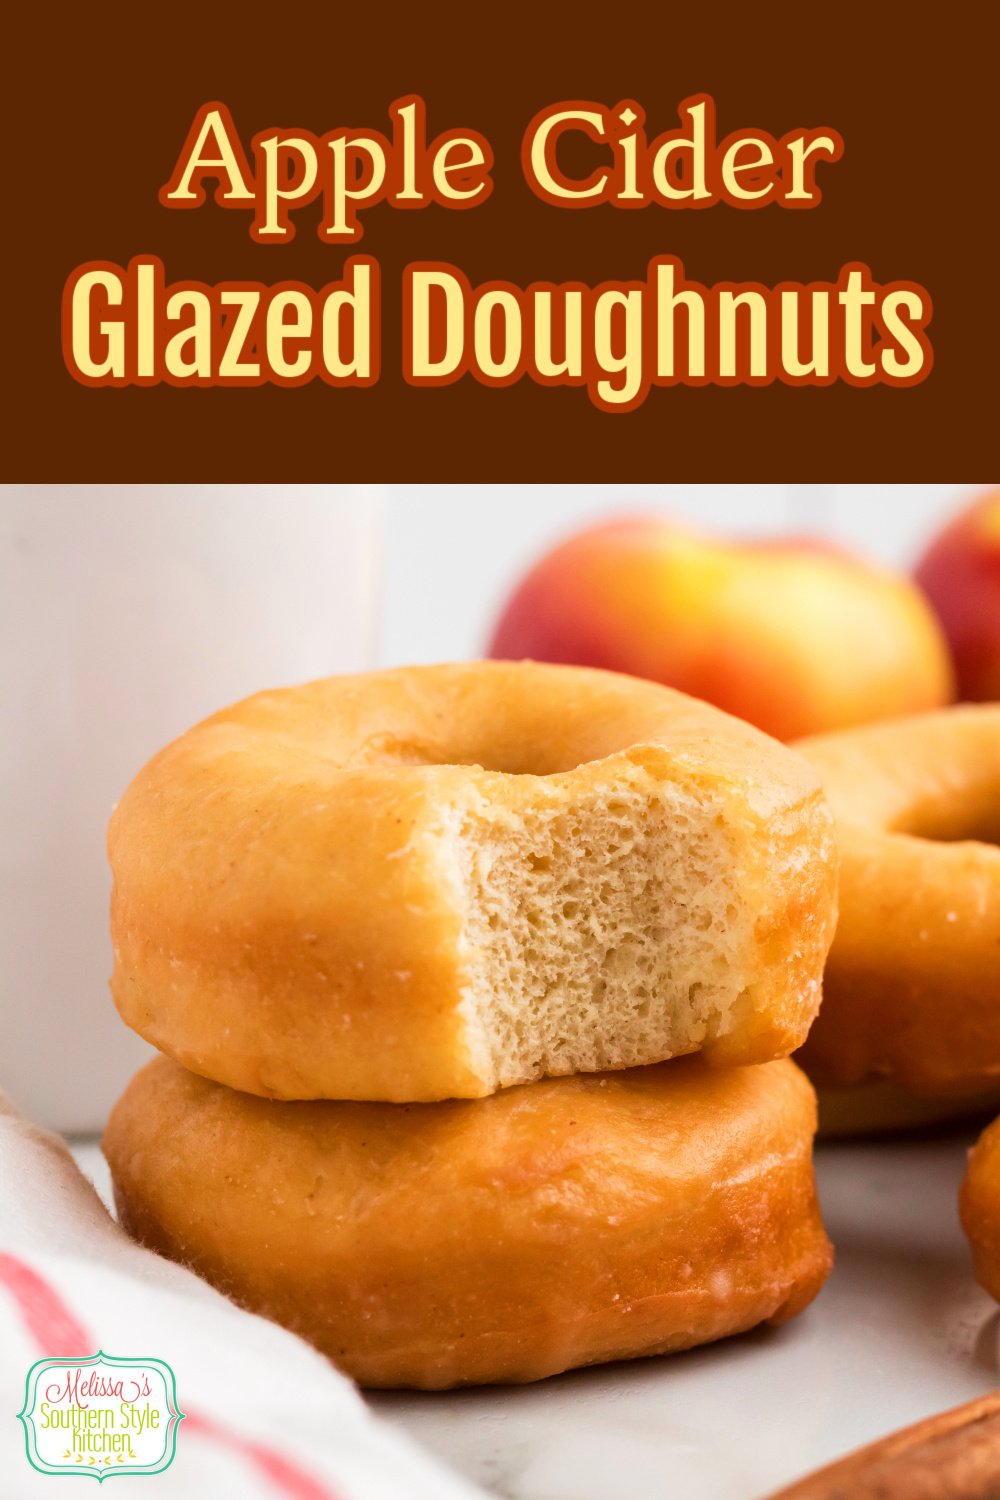 These fluffy Apple Cider Glazed Doughnuts coated in a sweet apple cider glaze are soft on the inside with a slightly crunchy exterior #appleciderdoughnuts #doughnutrecipes #appledonuts #donuts #donutrecipes #easydoughnuts #frieddoughuts